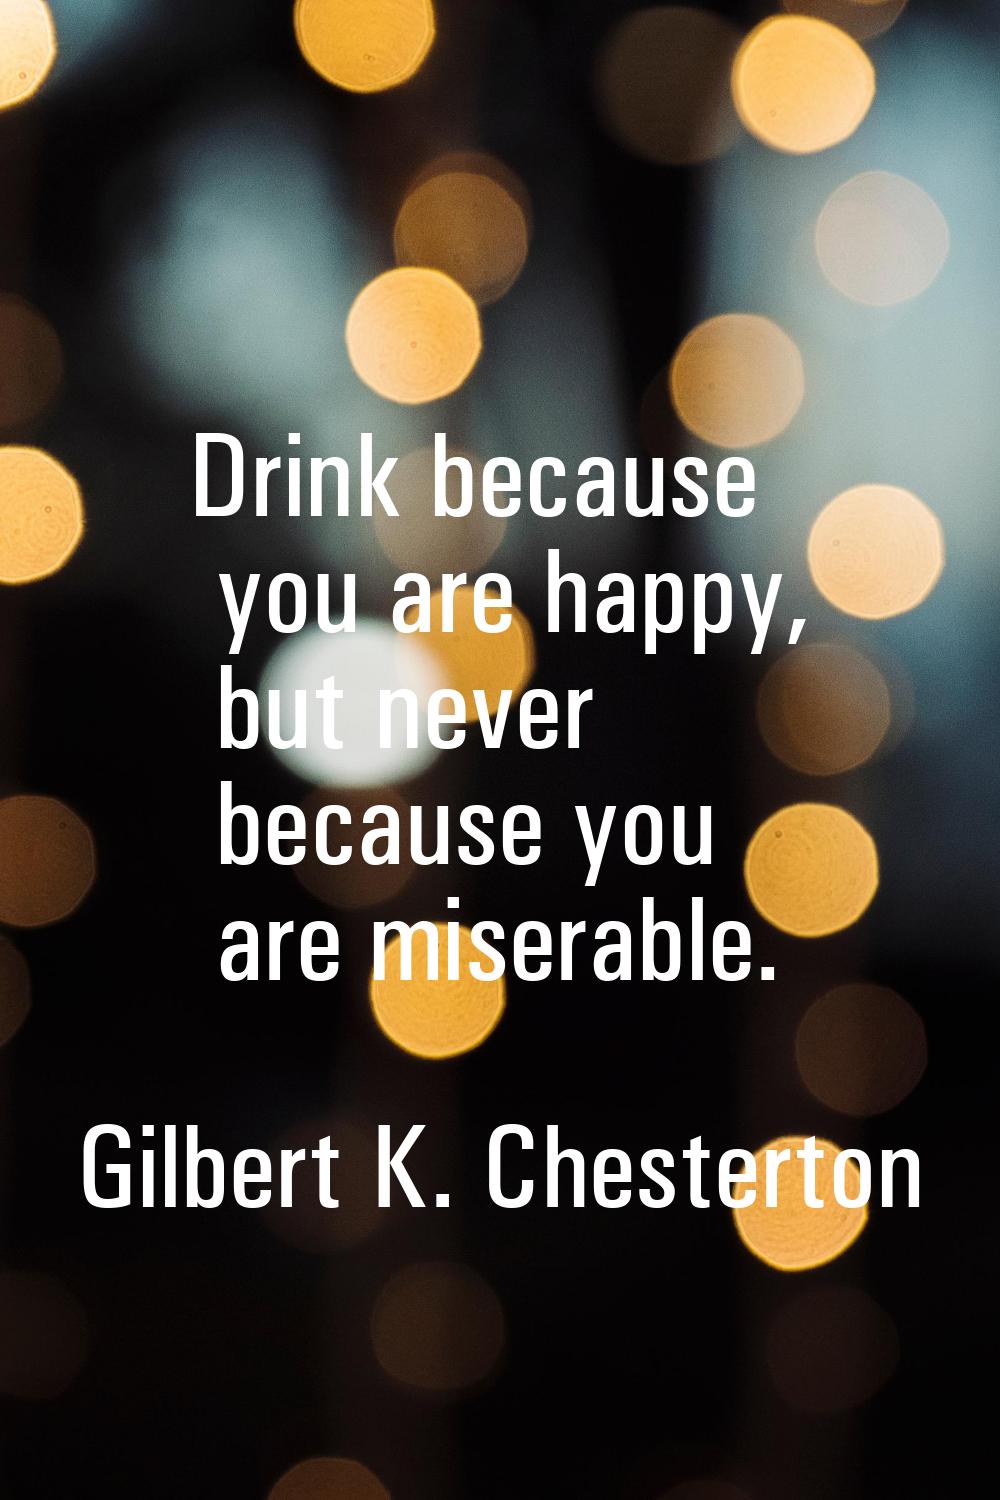 Drink because you are happy, but never because you are miserable.